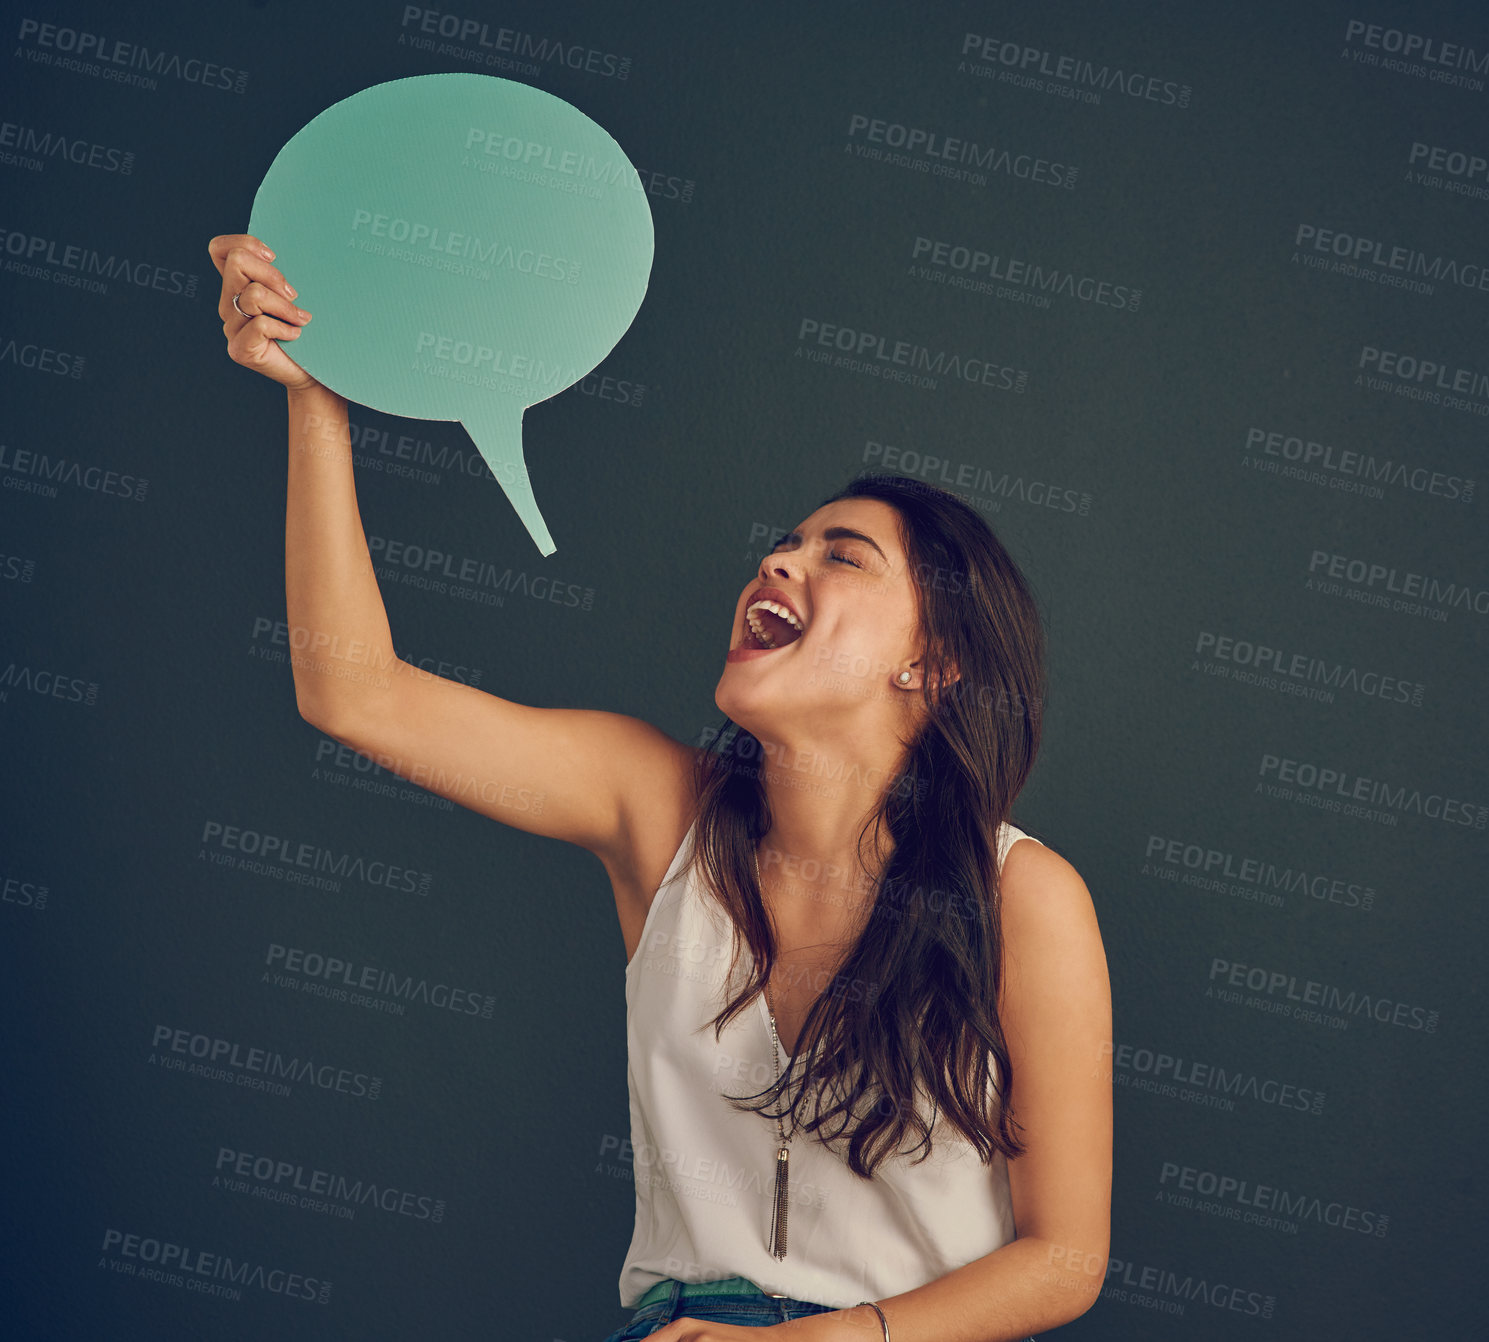 Buy stock photo Studio shot of a cheerful young woman holding up a speech bubble while standing against a dark background